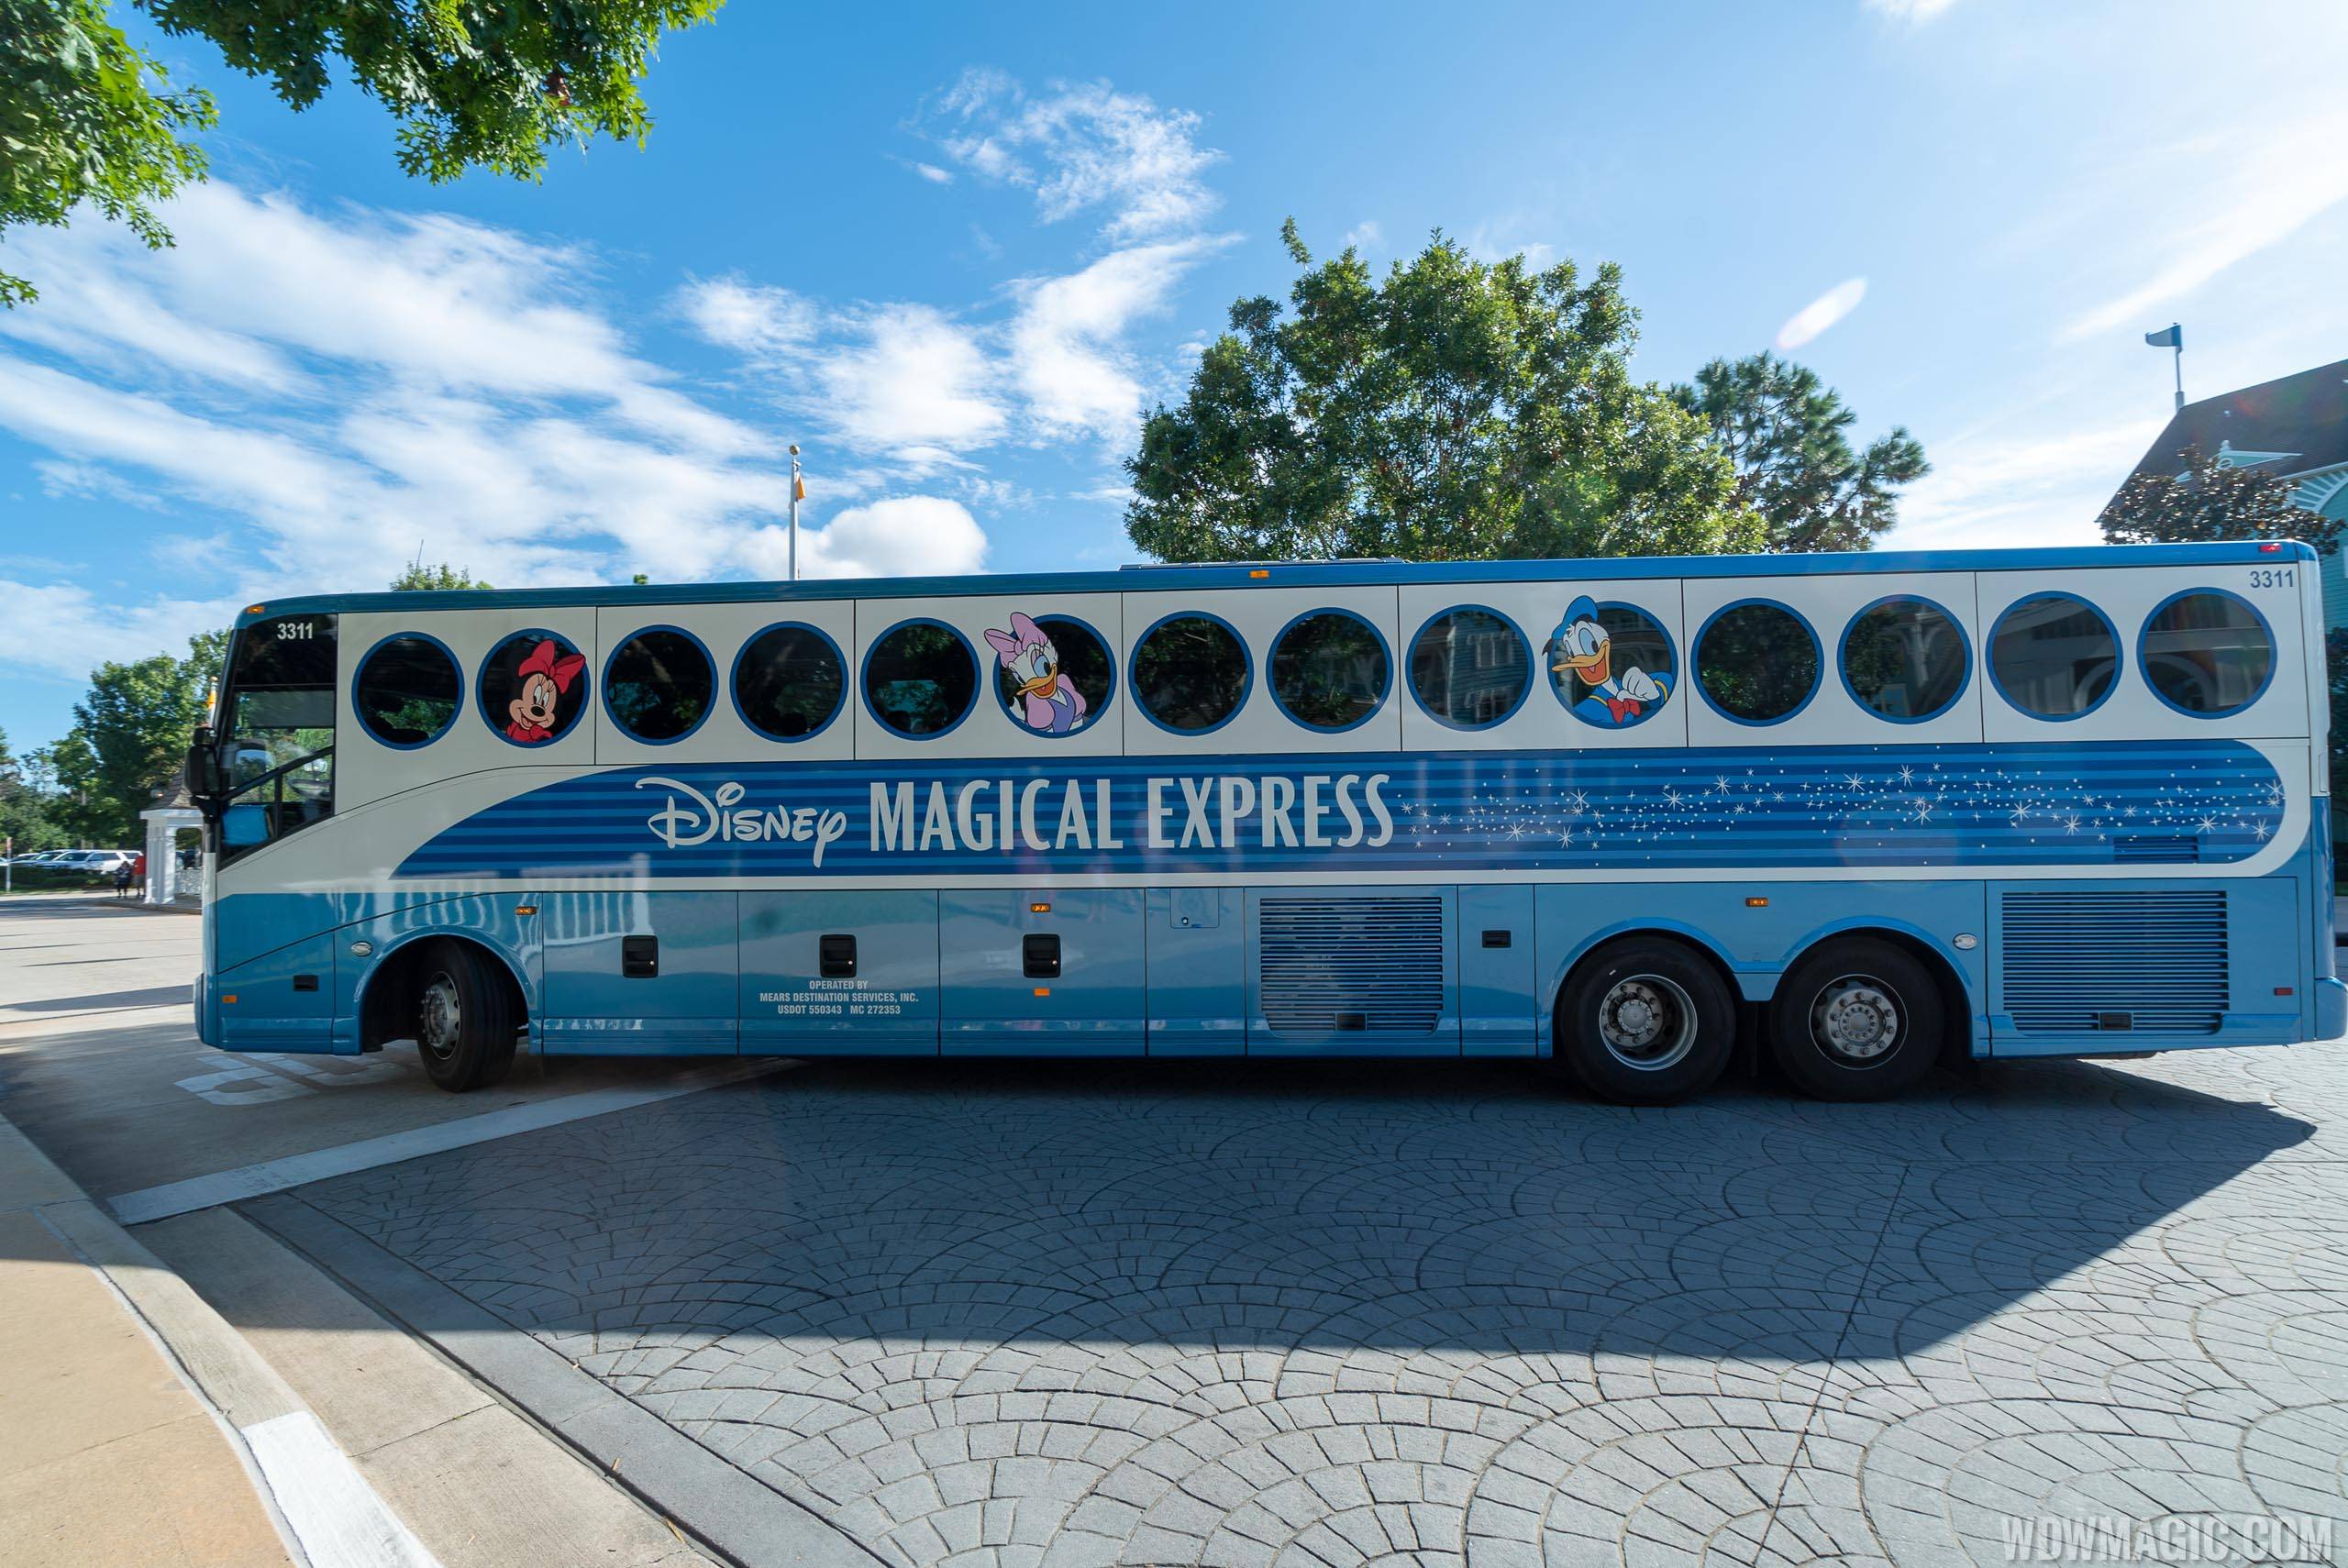 Magical Express is still available but with modifications